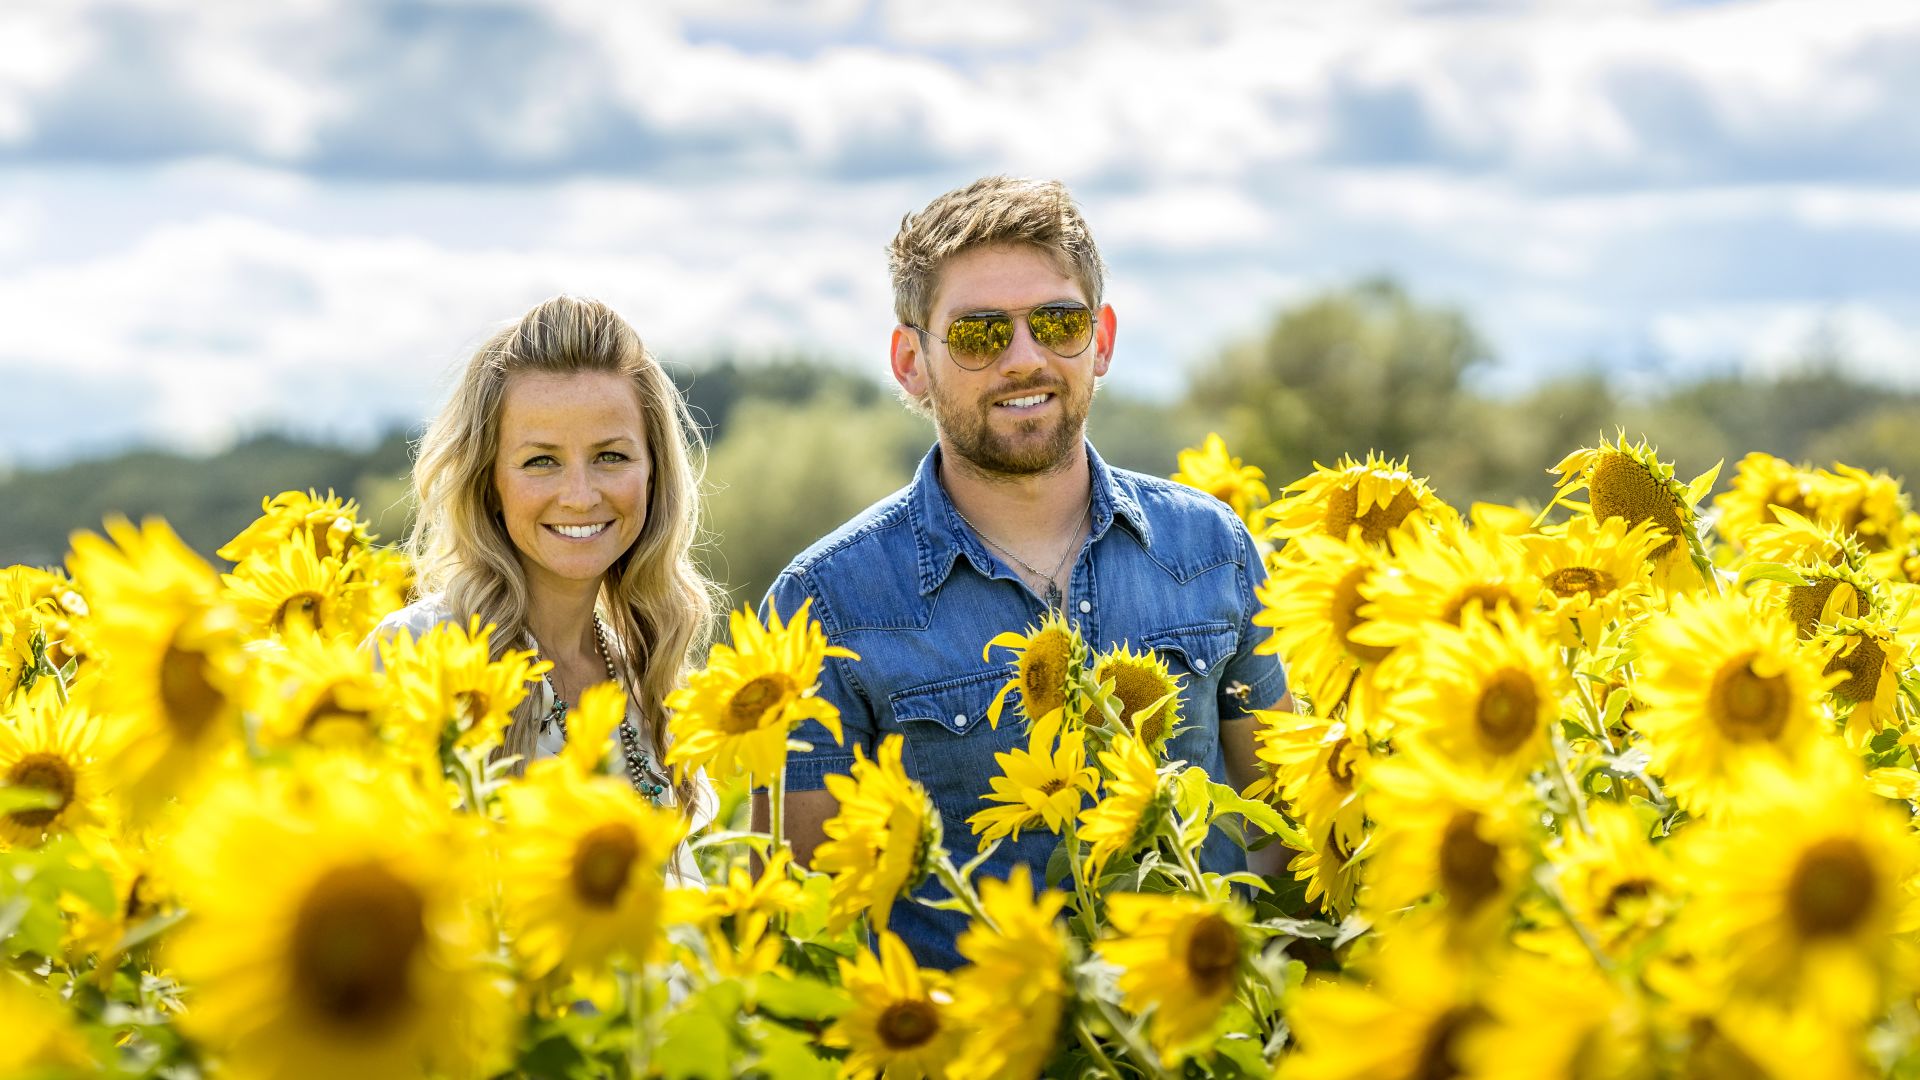 A Man And Woman In A Field Of Yellow Flowers